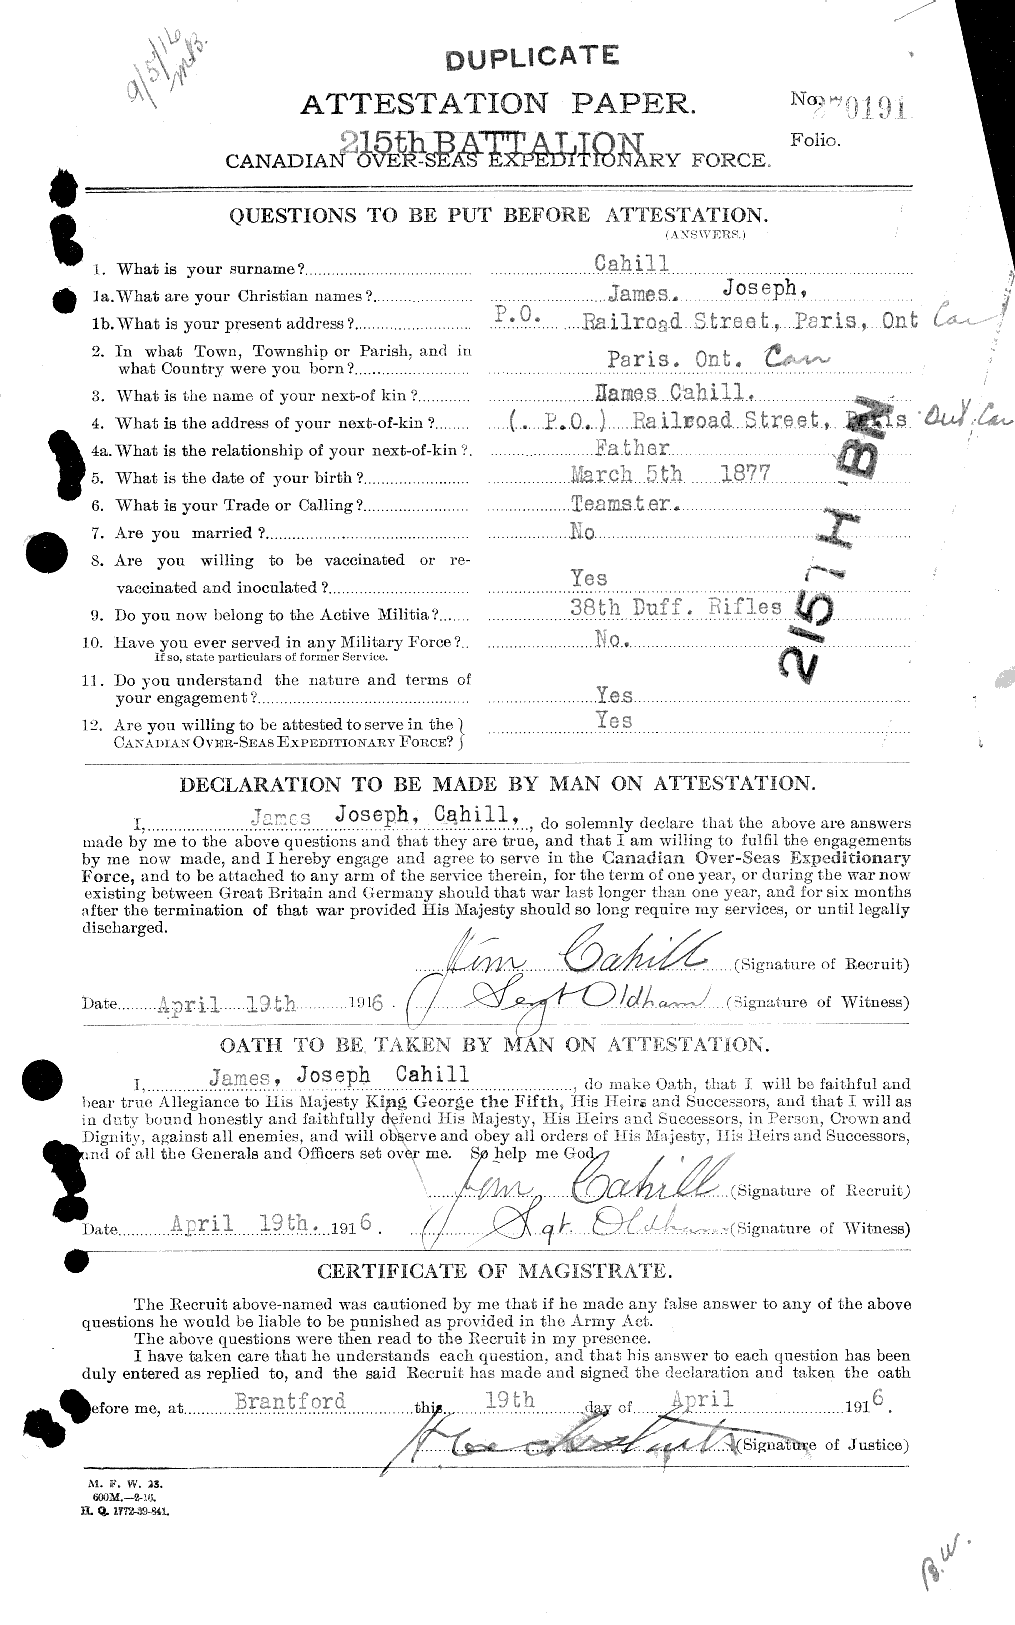 Personnel Records of the First World War - CEF 000250a